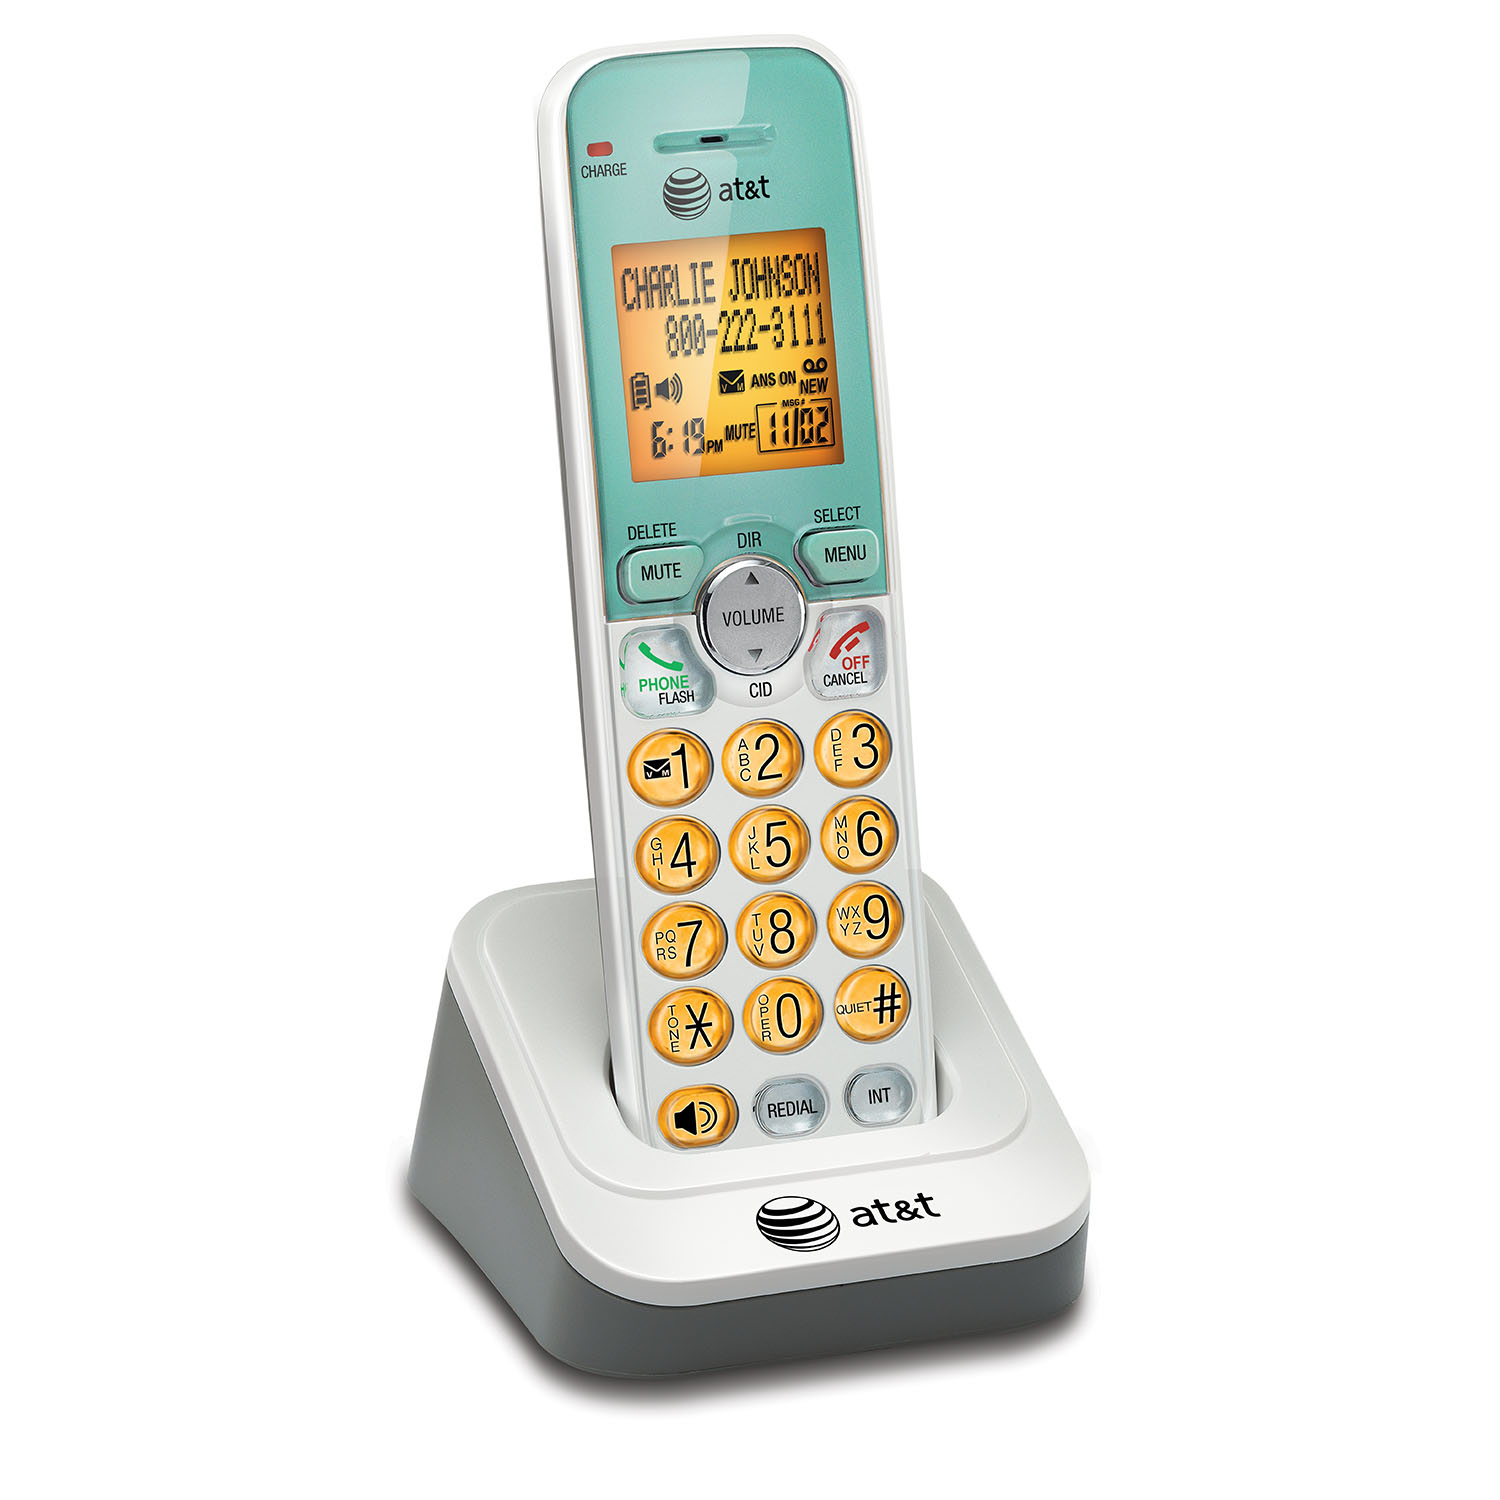 5 handset cordless answering system with caller ID/call waiting - view 9